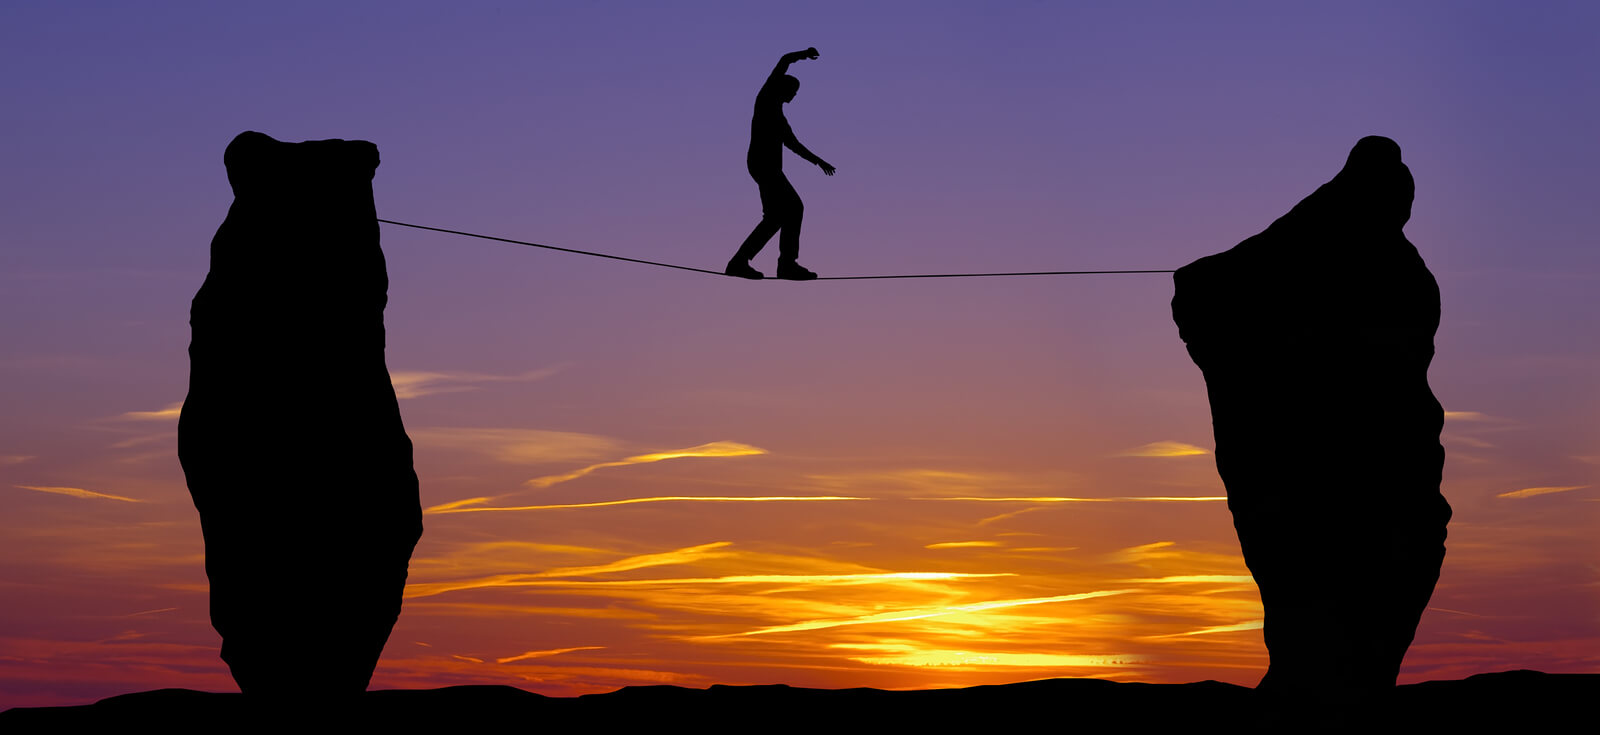 Silhouette Of A Man Walking On The Tightrope